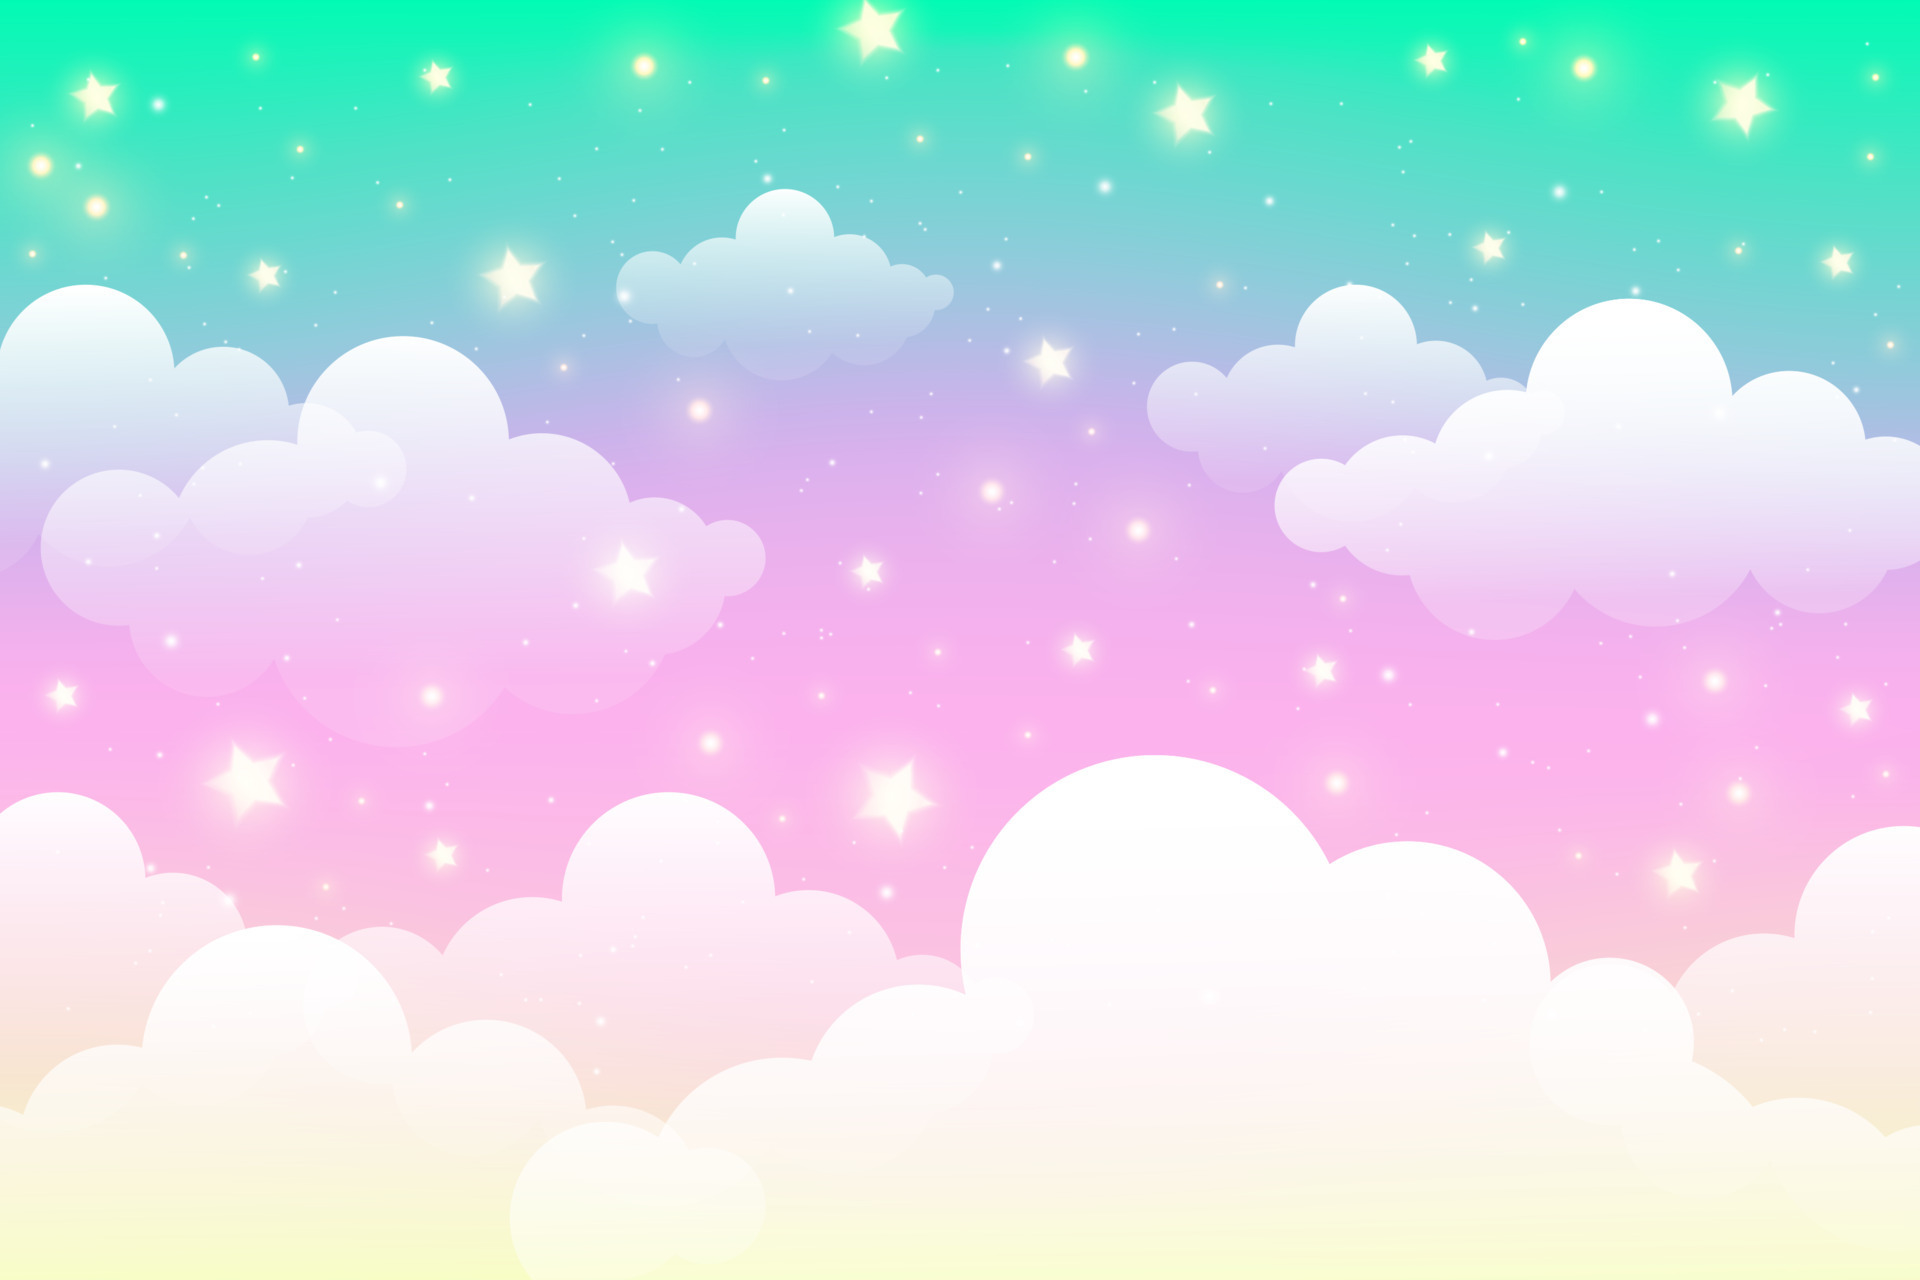 Clouds wallpaper cute HD background vector  free image by rawpixelcom   Sasi  Pastel background wallpapers Pastel background Cloud wallpaper